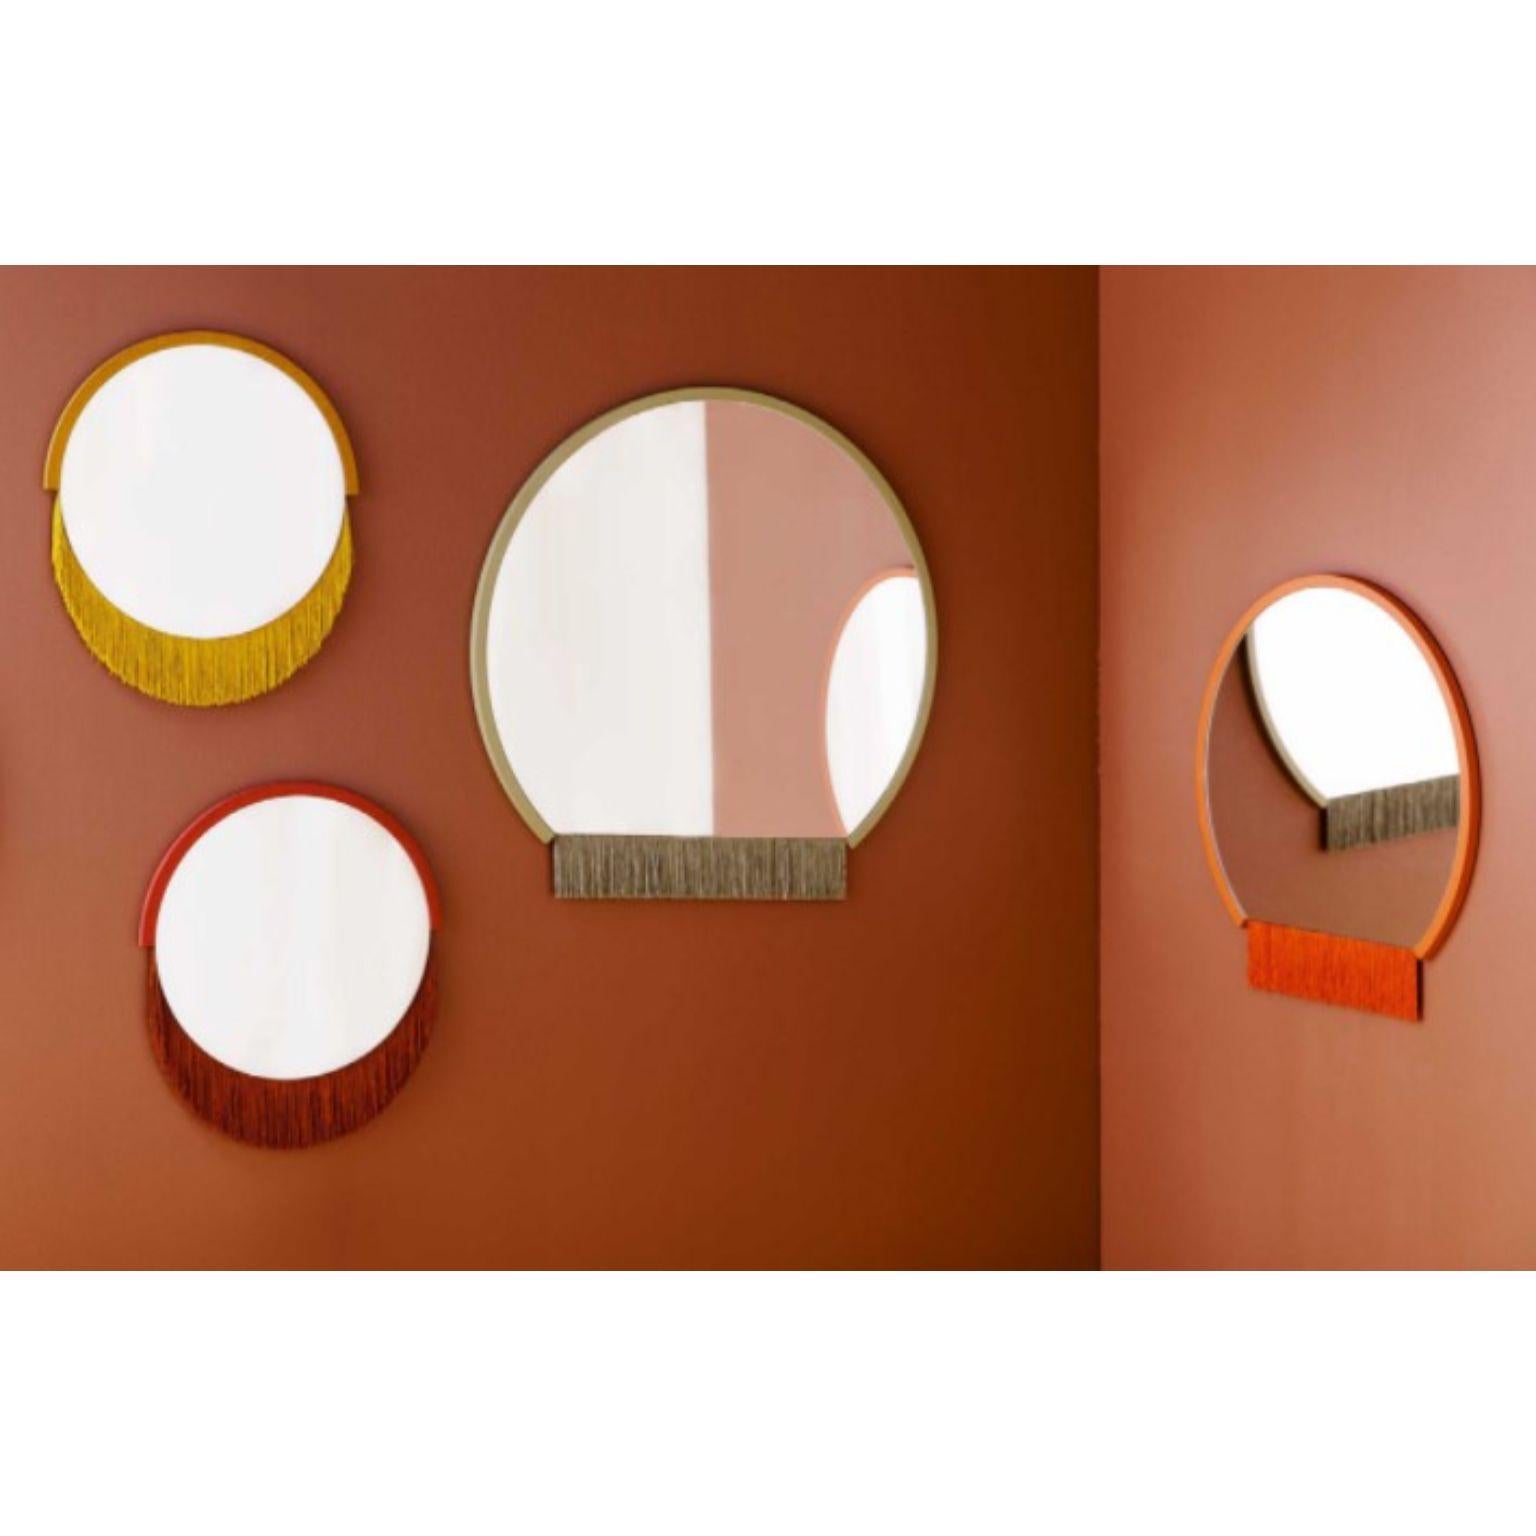 Set of 4 Boudoir wall mirrors by Tero Kuitunen.
Small (2), Medium and Large Mirrors.
Material: glass mirror, mdf board, textile fringes.
Dimensions: D68 x W68 x H1.6, D53 x W53 x H1.6 cm, D38 x W38 x H1.6 cm
Also Available : Different size,